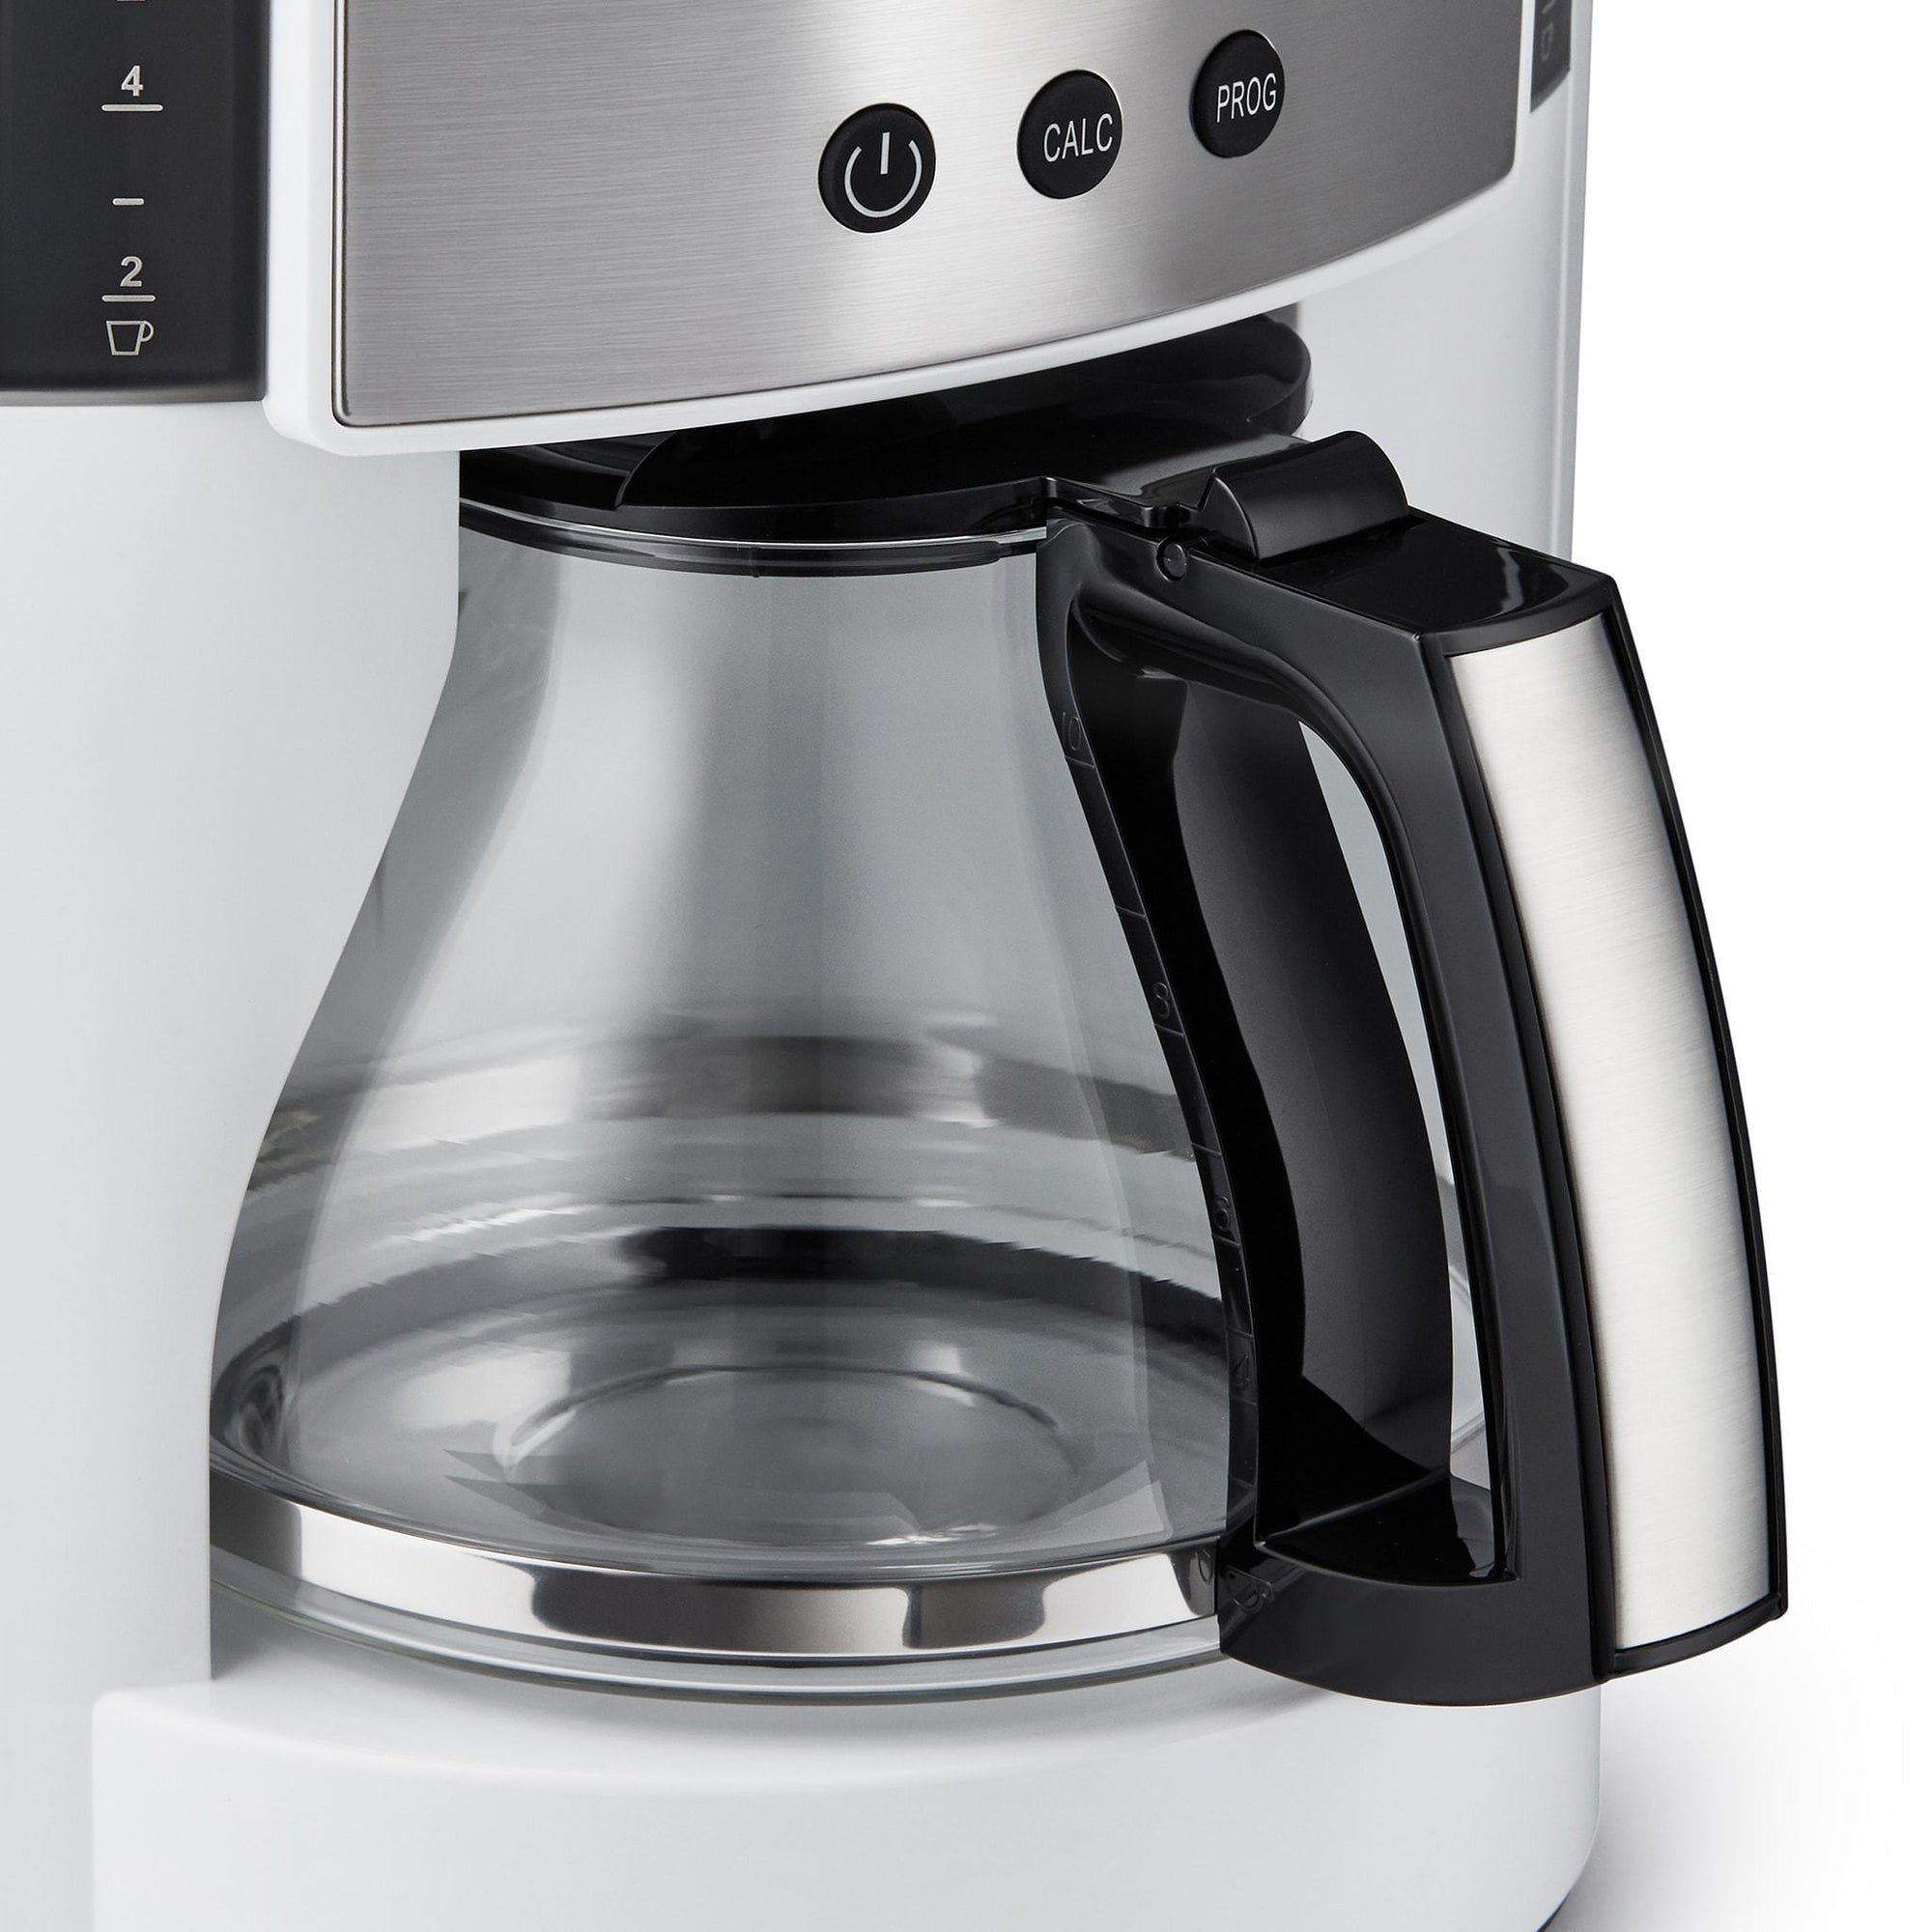 Melitta® Pour-Over? Brewer 10 Cup Coffee Maker with Stainless Thermal Carafe